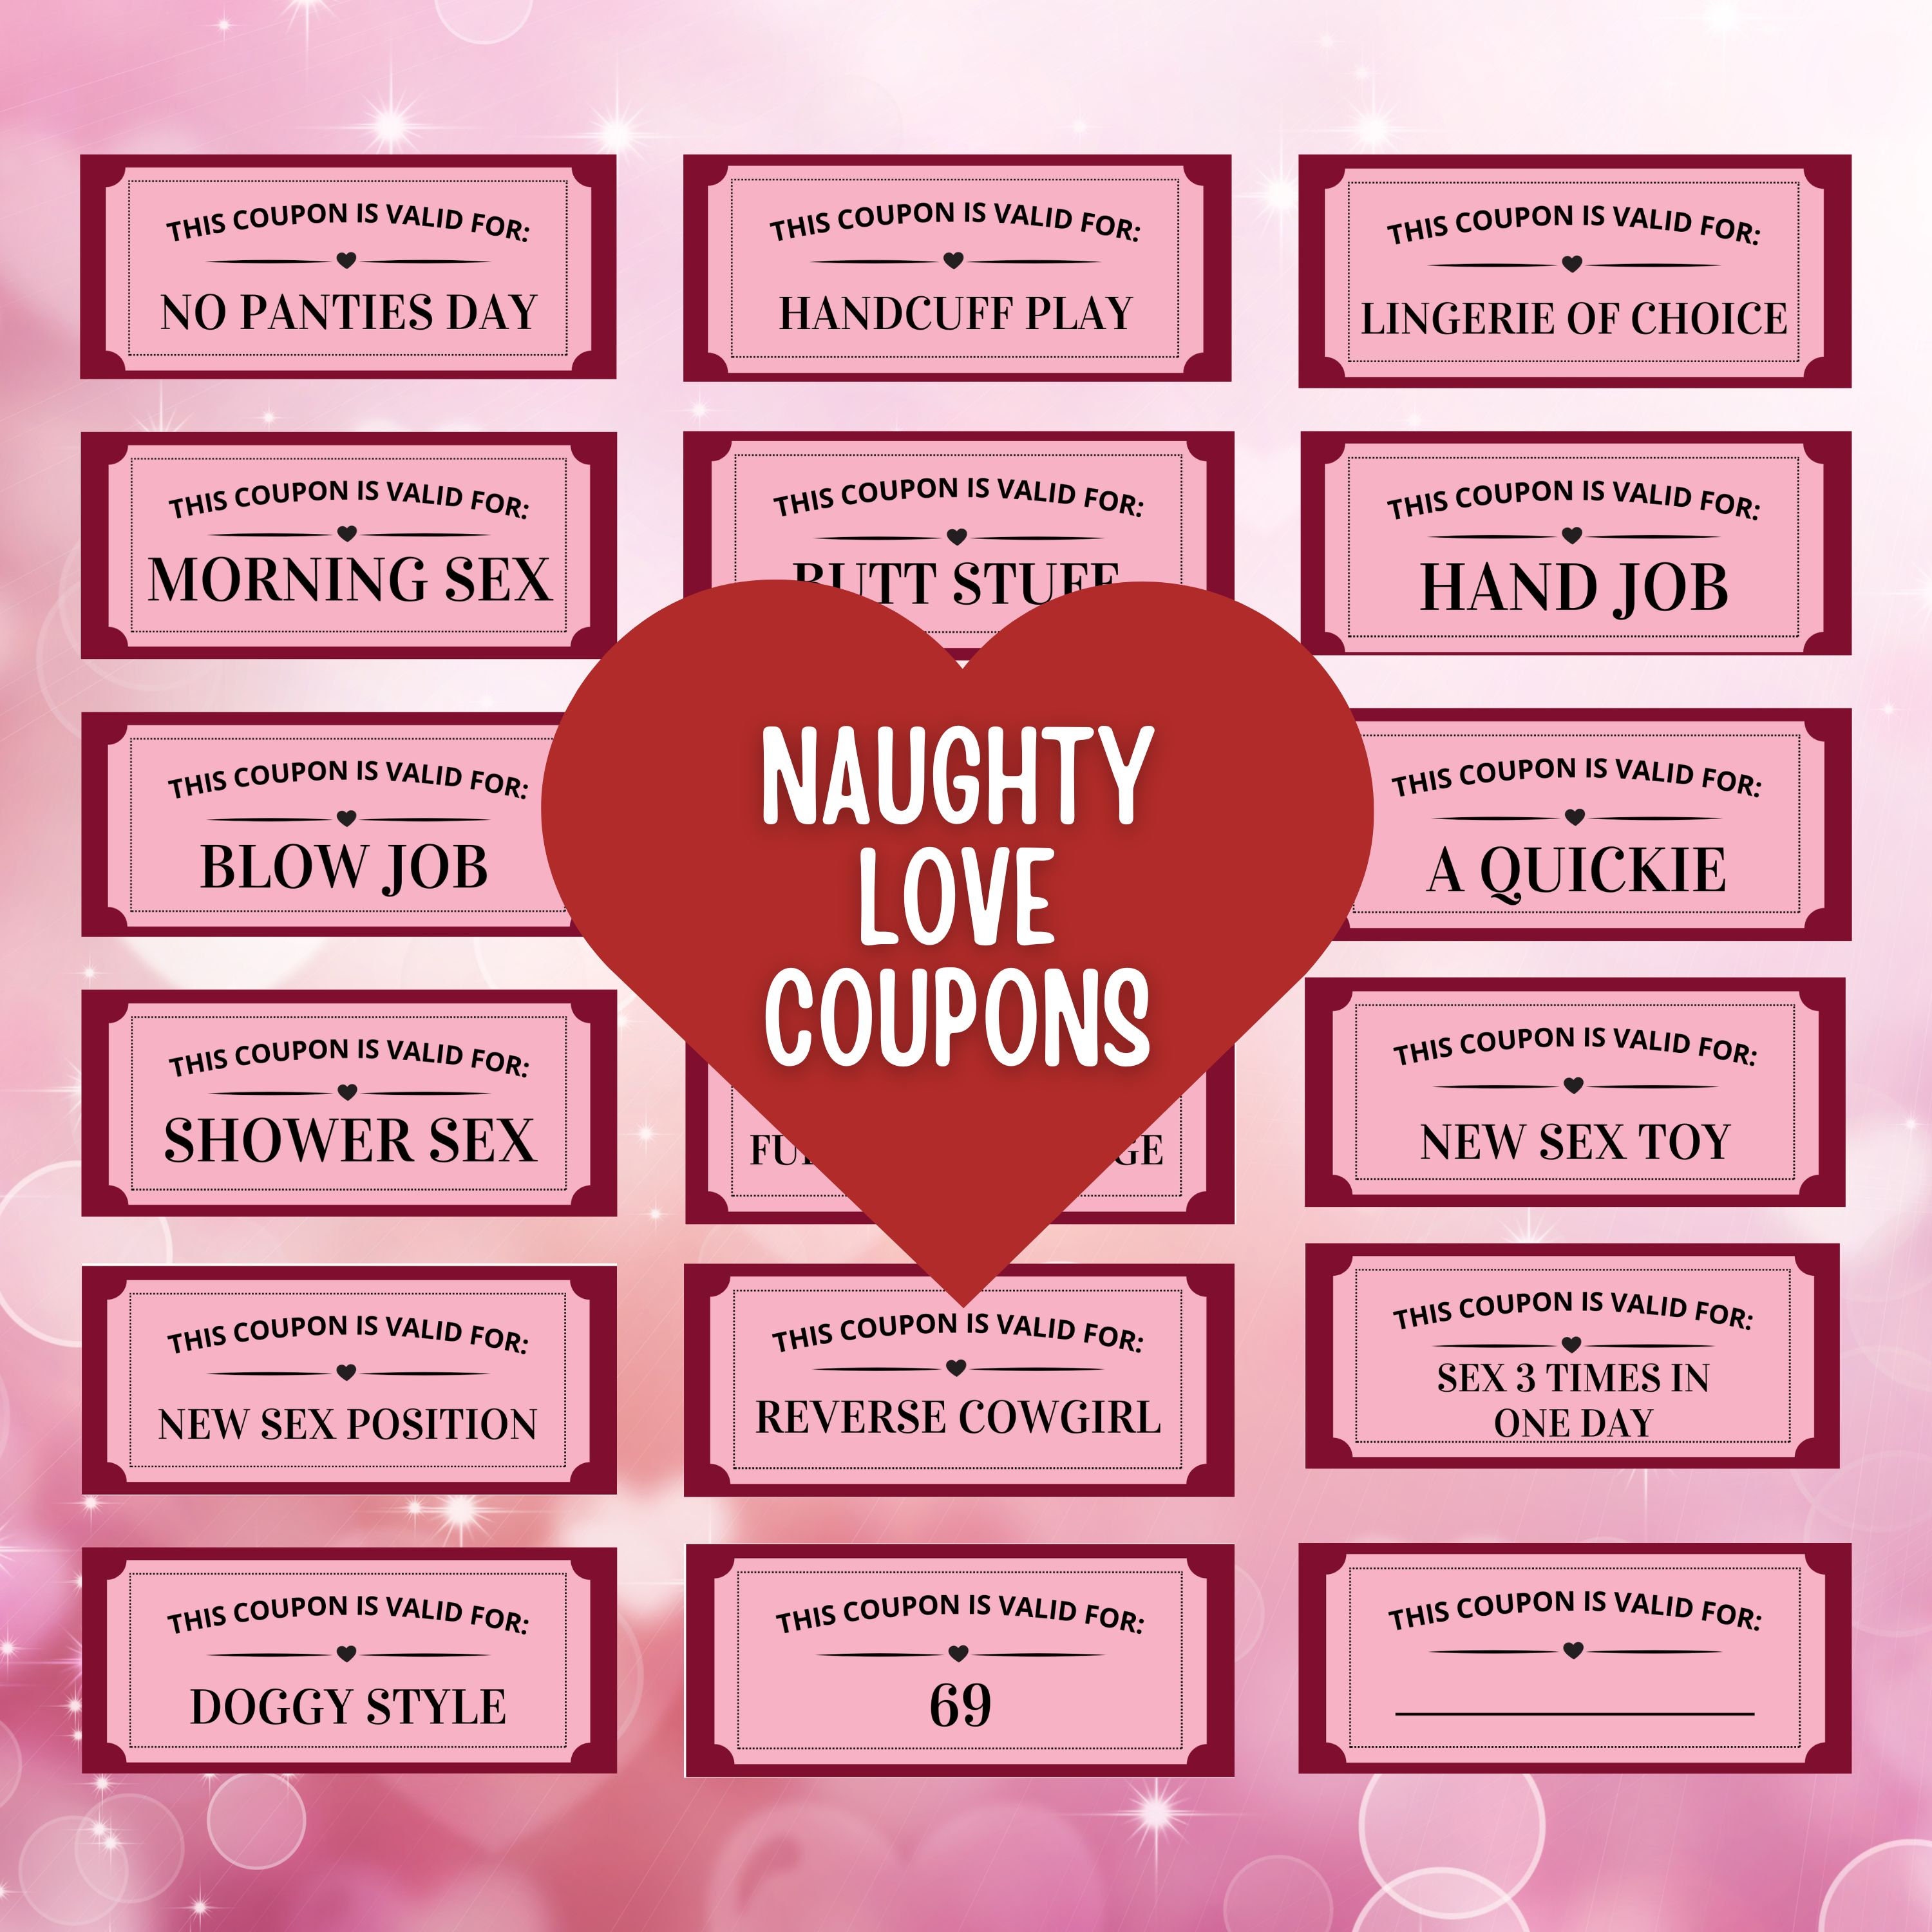 Love Coupons for Him Naughty Coupons Valentines Day Gift pic